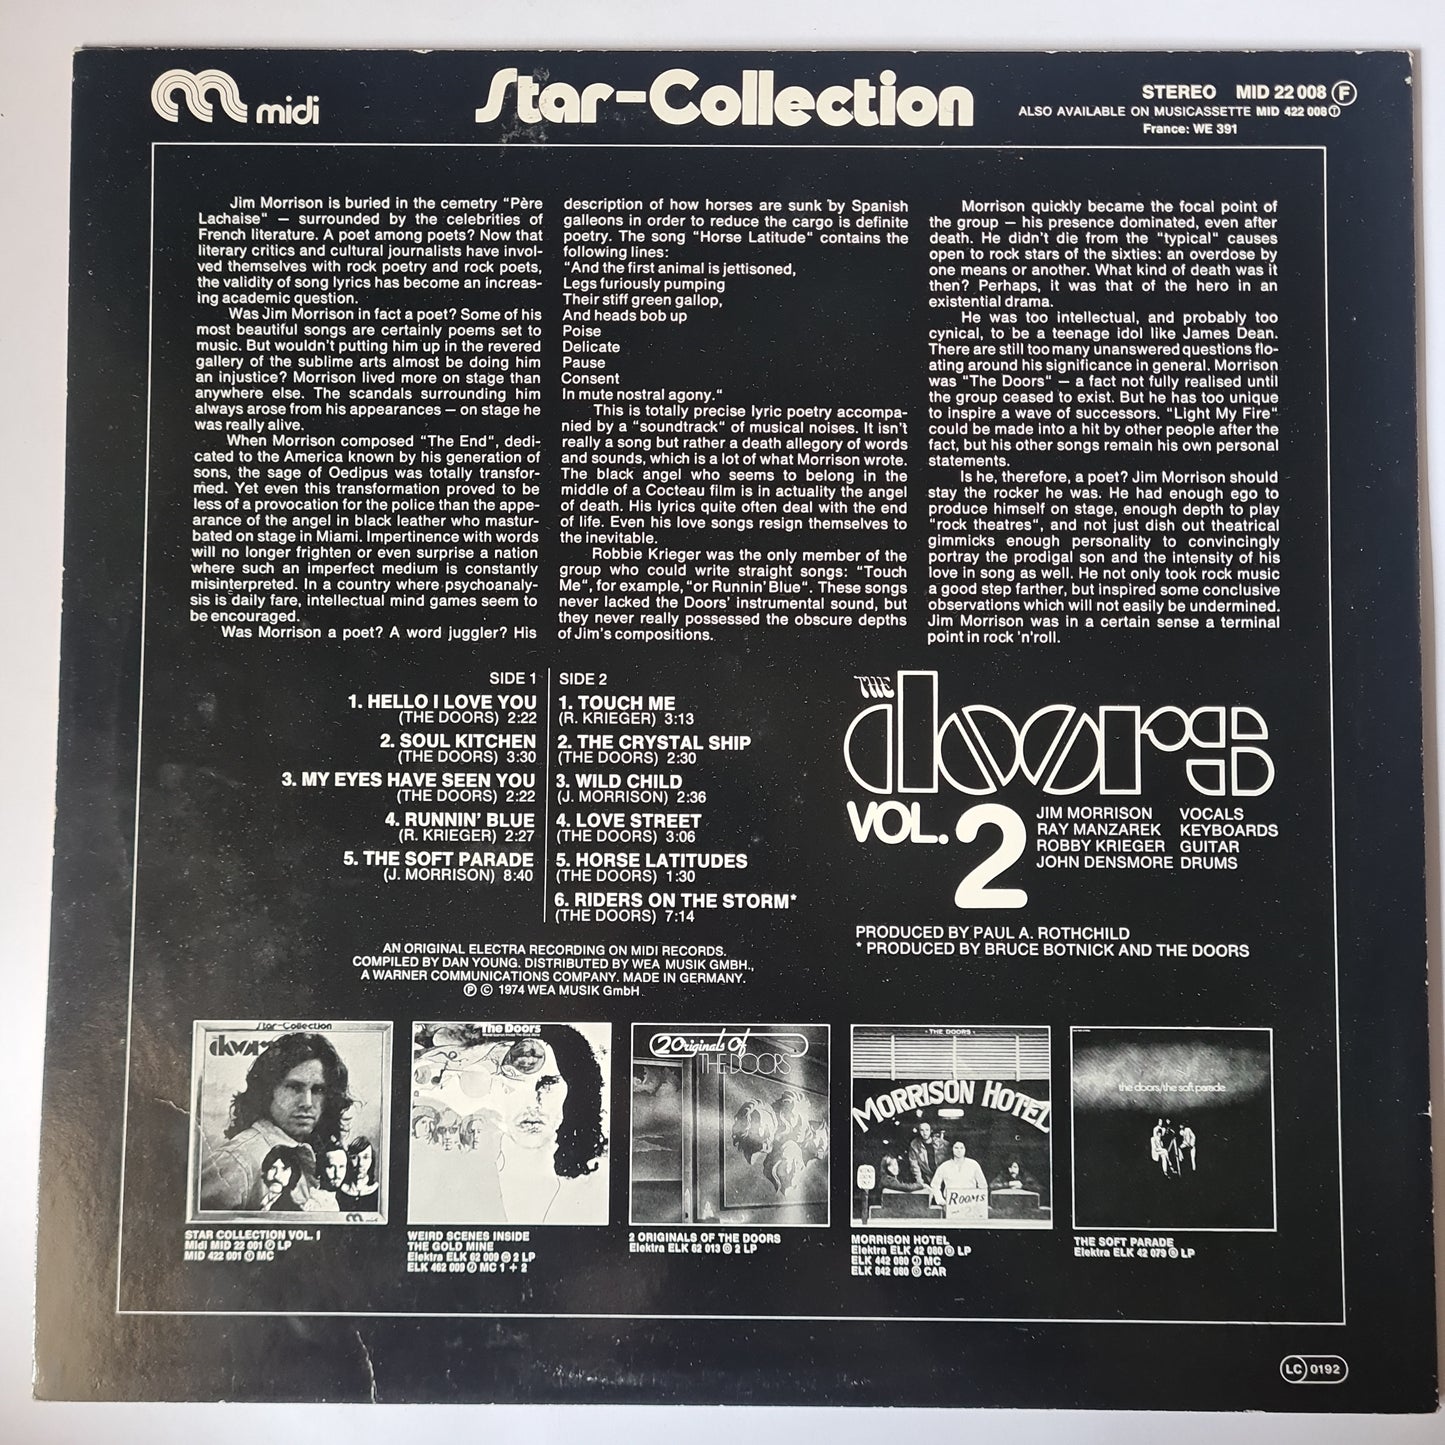 The Doors – Star Collection (Greatest hits) Vol 2. - 1974 - Vinyl Record